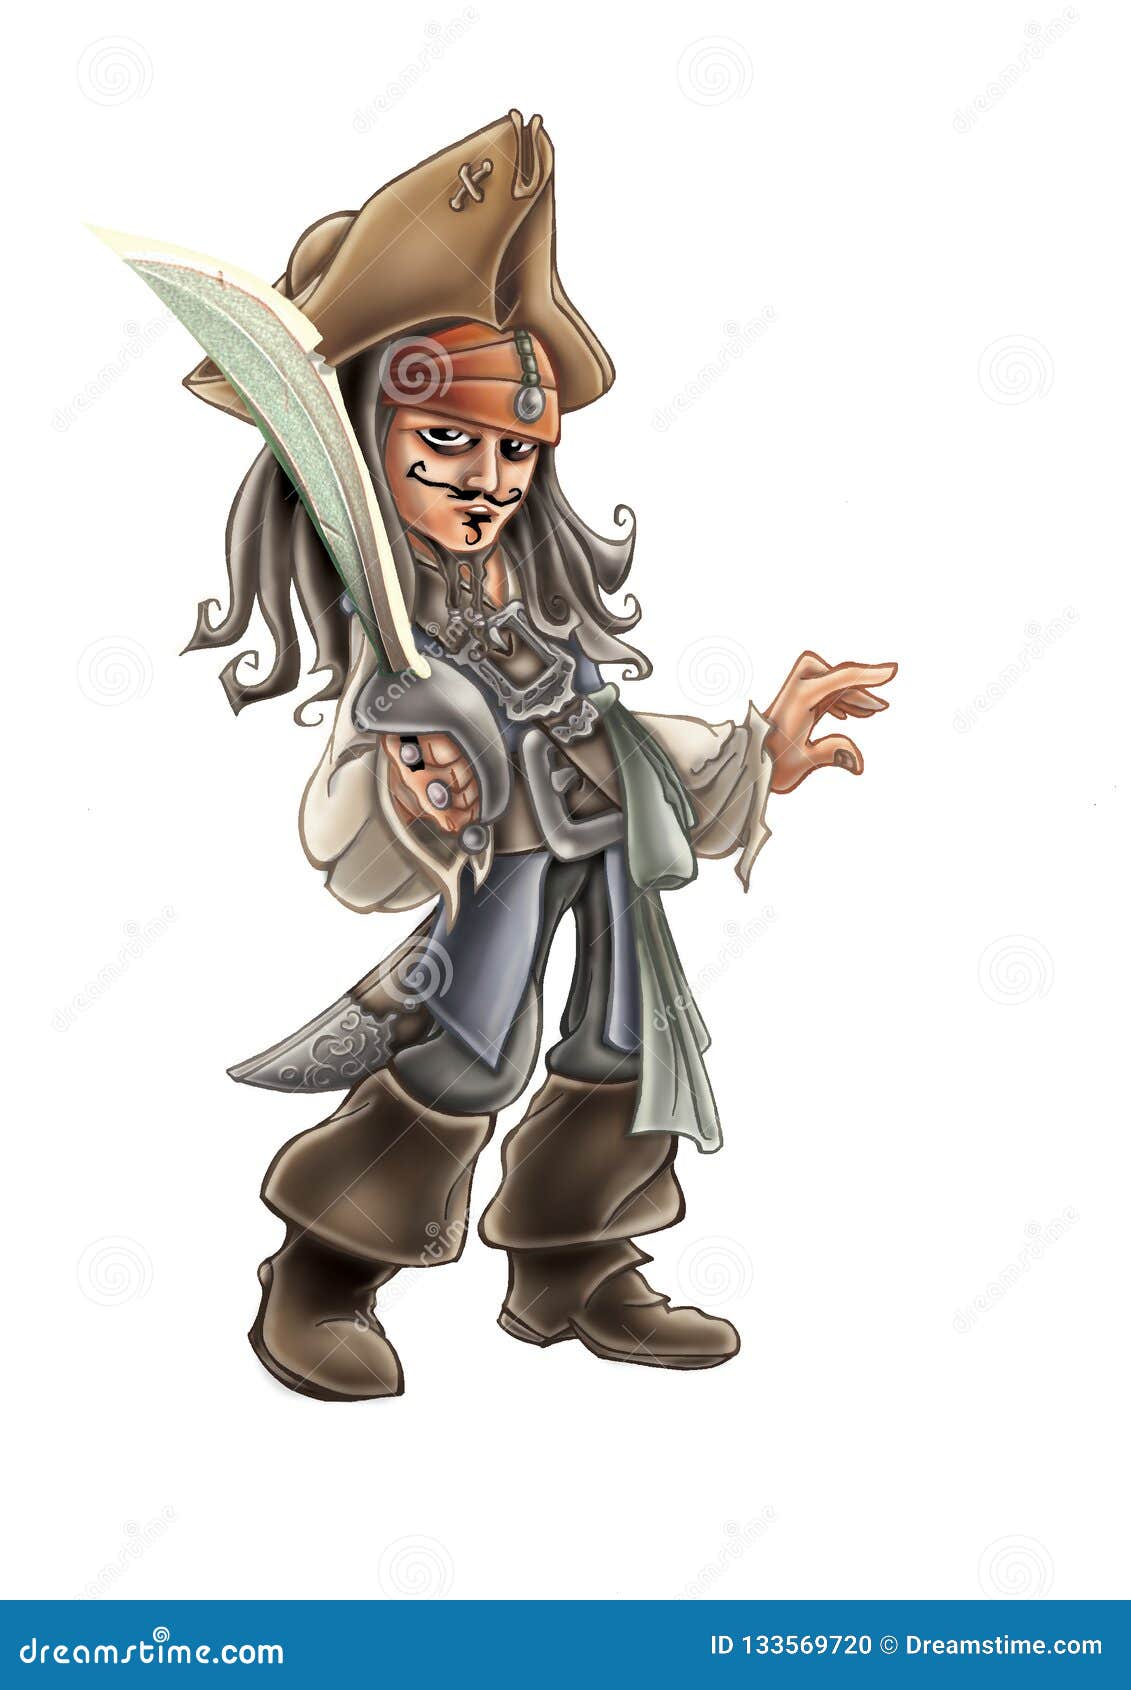 high-quality-illustration-pirate-mascot-cover-background-wallpaper-high-quality-illustration-pirate-mascot-useful-covers-133569720.jpg